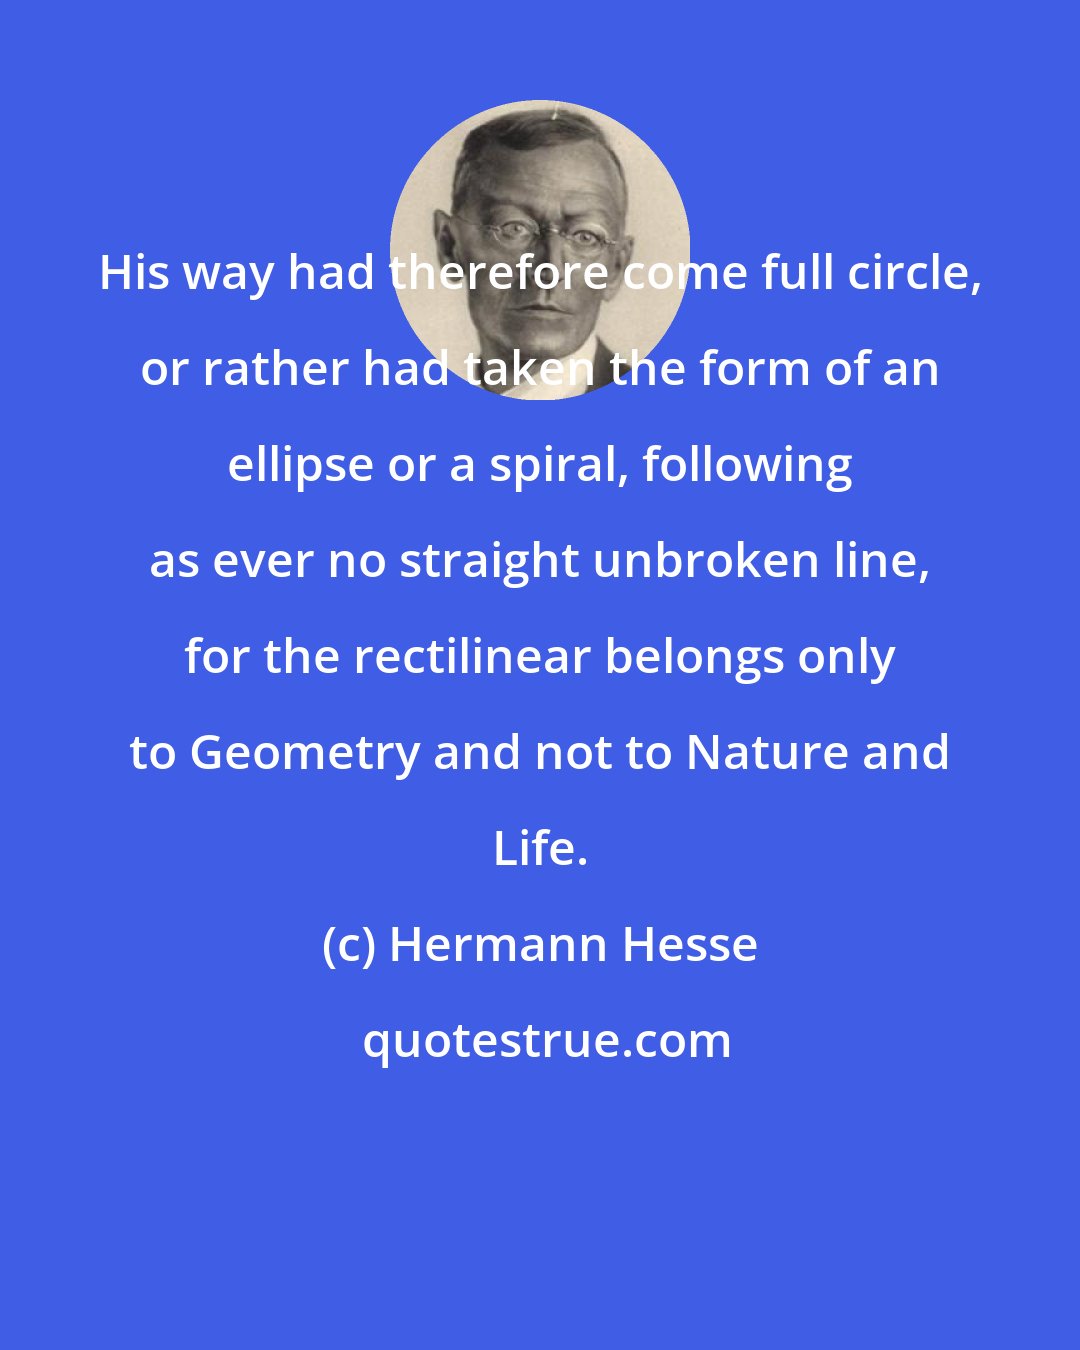 Hermann Hesse: His way had therefore come full circle, or rather had taken the form of an ellipse or a spiral, following as ever no straight unbroken line, for the rectilinear belongs only to Geometry and not to Nature and Life.